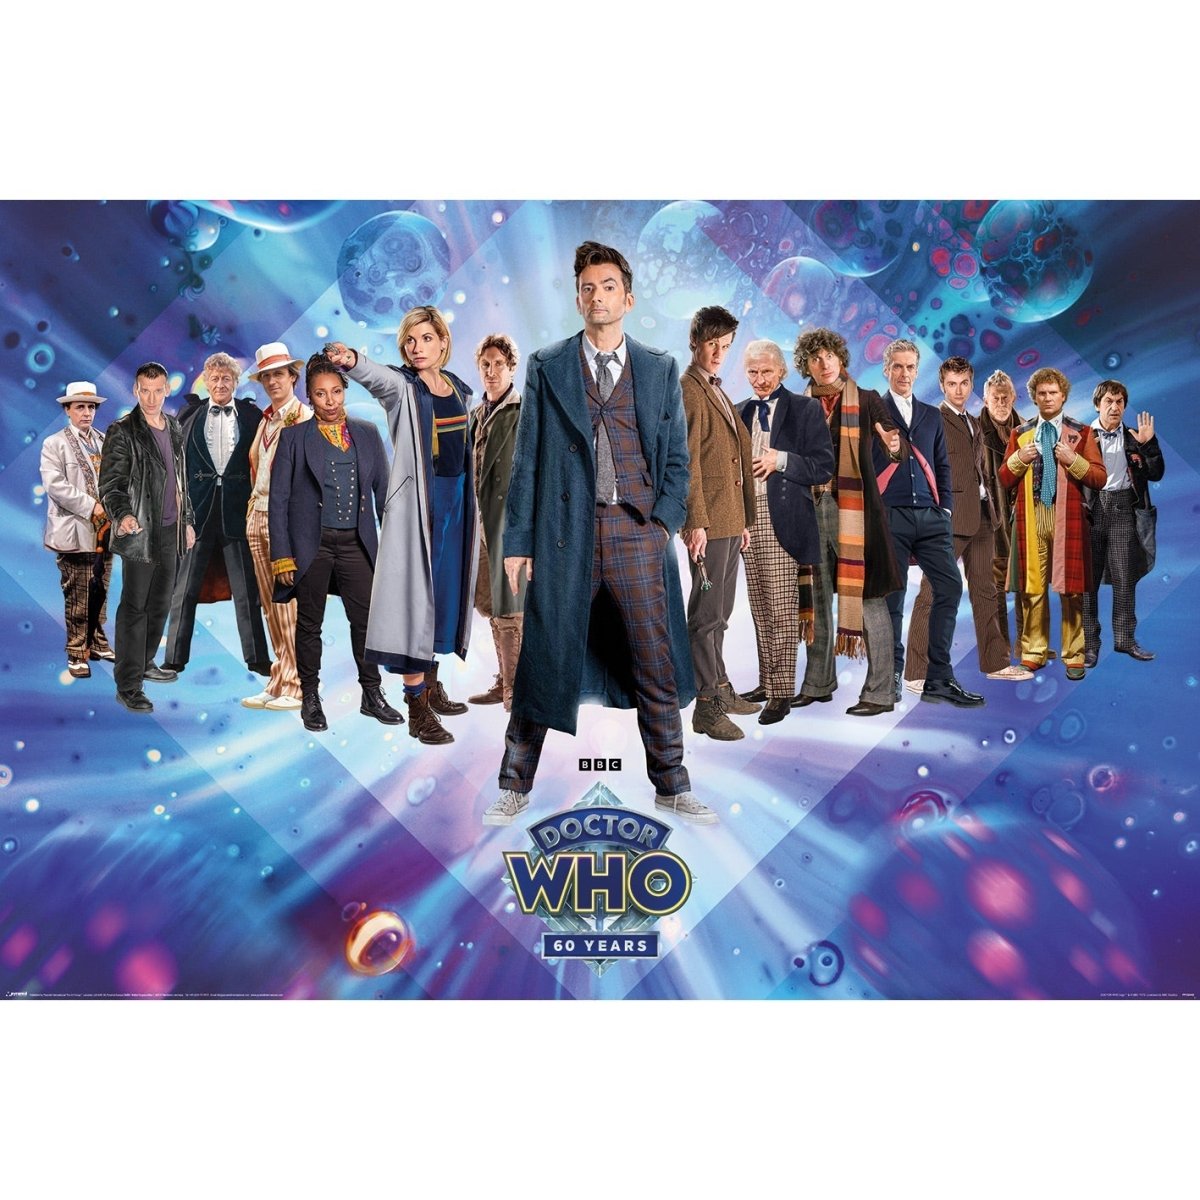 Doctor Who (60th Anniversary) 61x91.5 cm Maxi Poster - Inspire Newquay